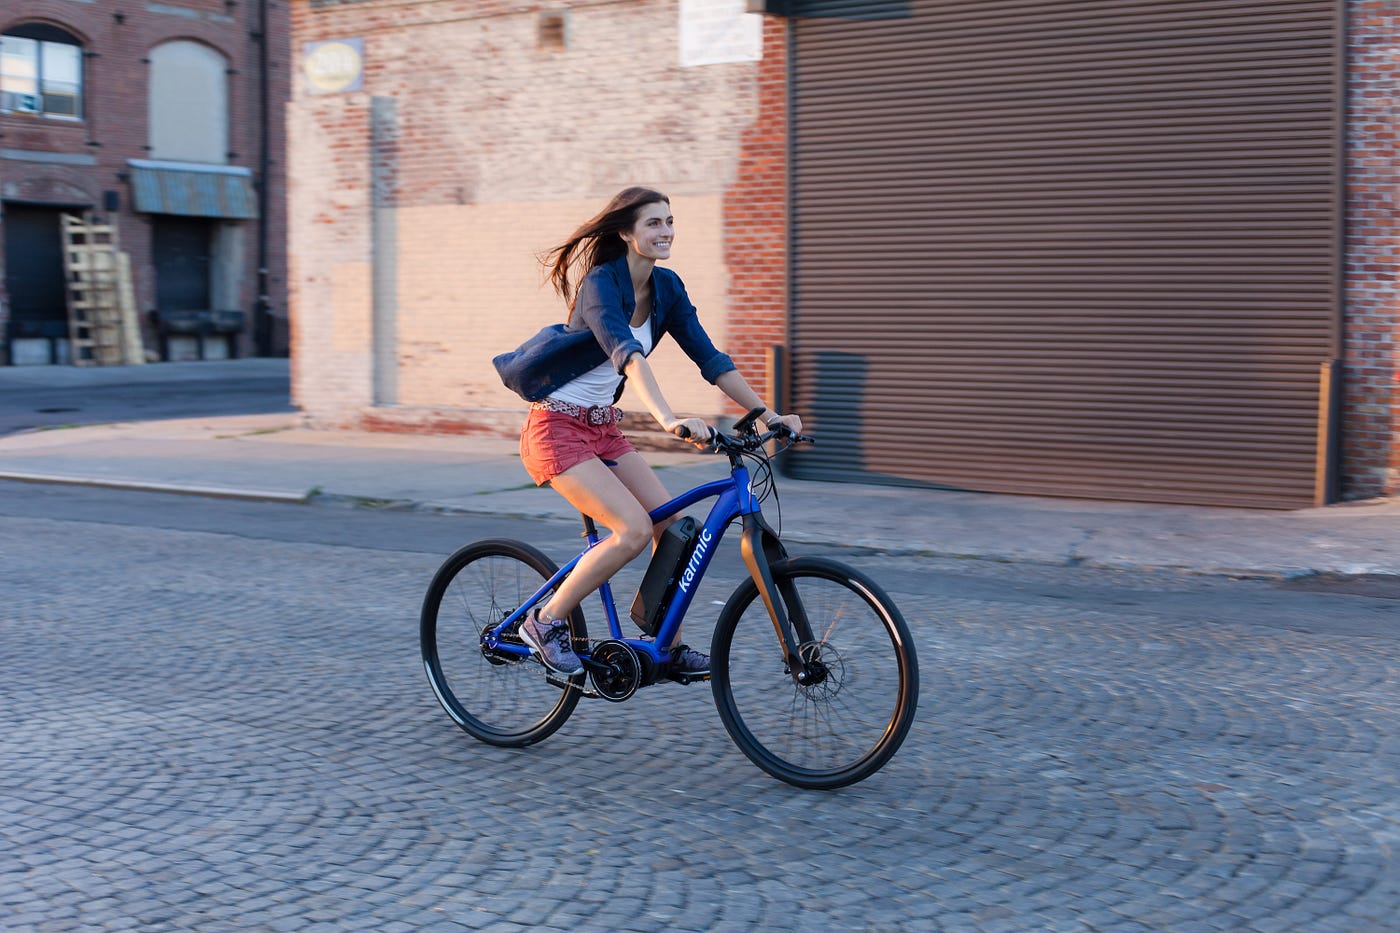 The 6 Reasons an eBike Will Change Your Life | by Molly J Hurford | Karmic  Bikes | Medium